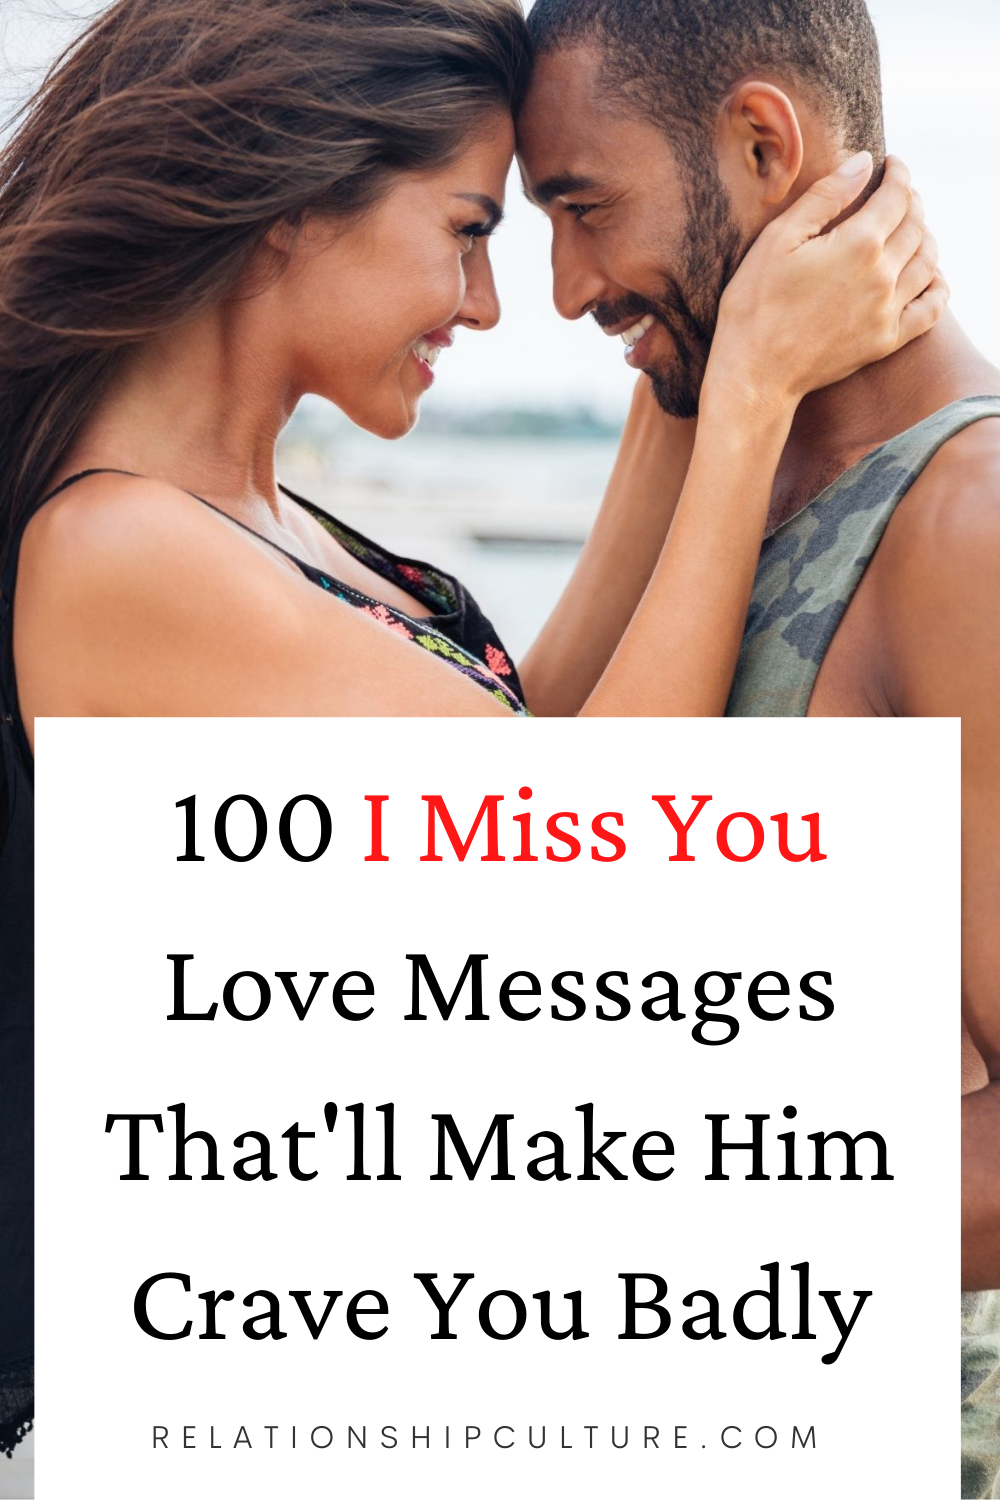  I miss you love messages